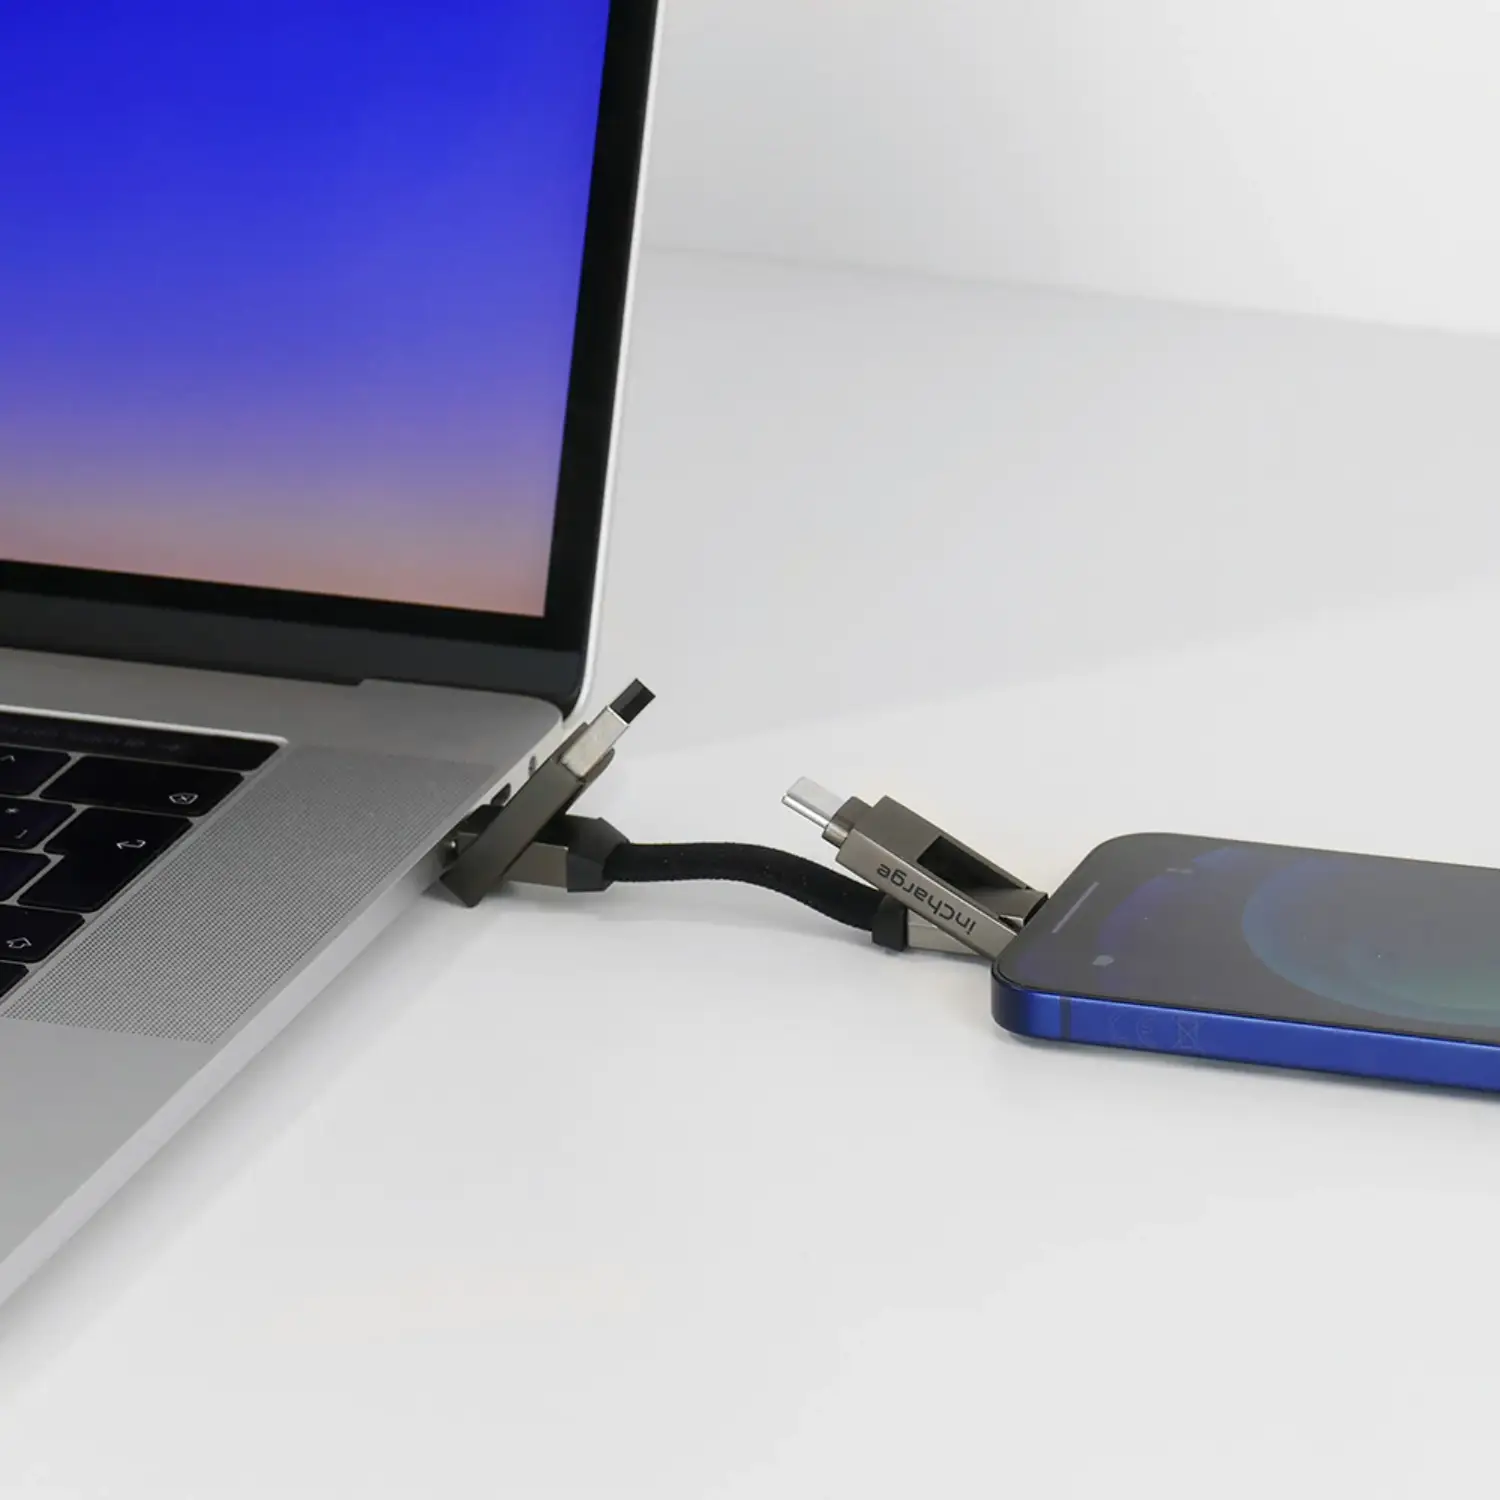 incharge 6 - The Six-in-One Swiss Army Knife of Cables, Portable Keyring Compatible Retail Packaging